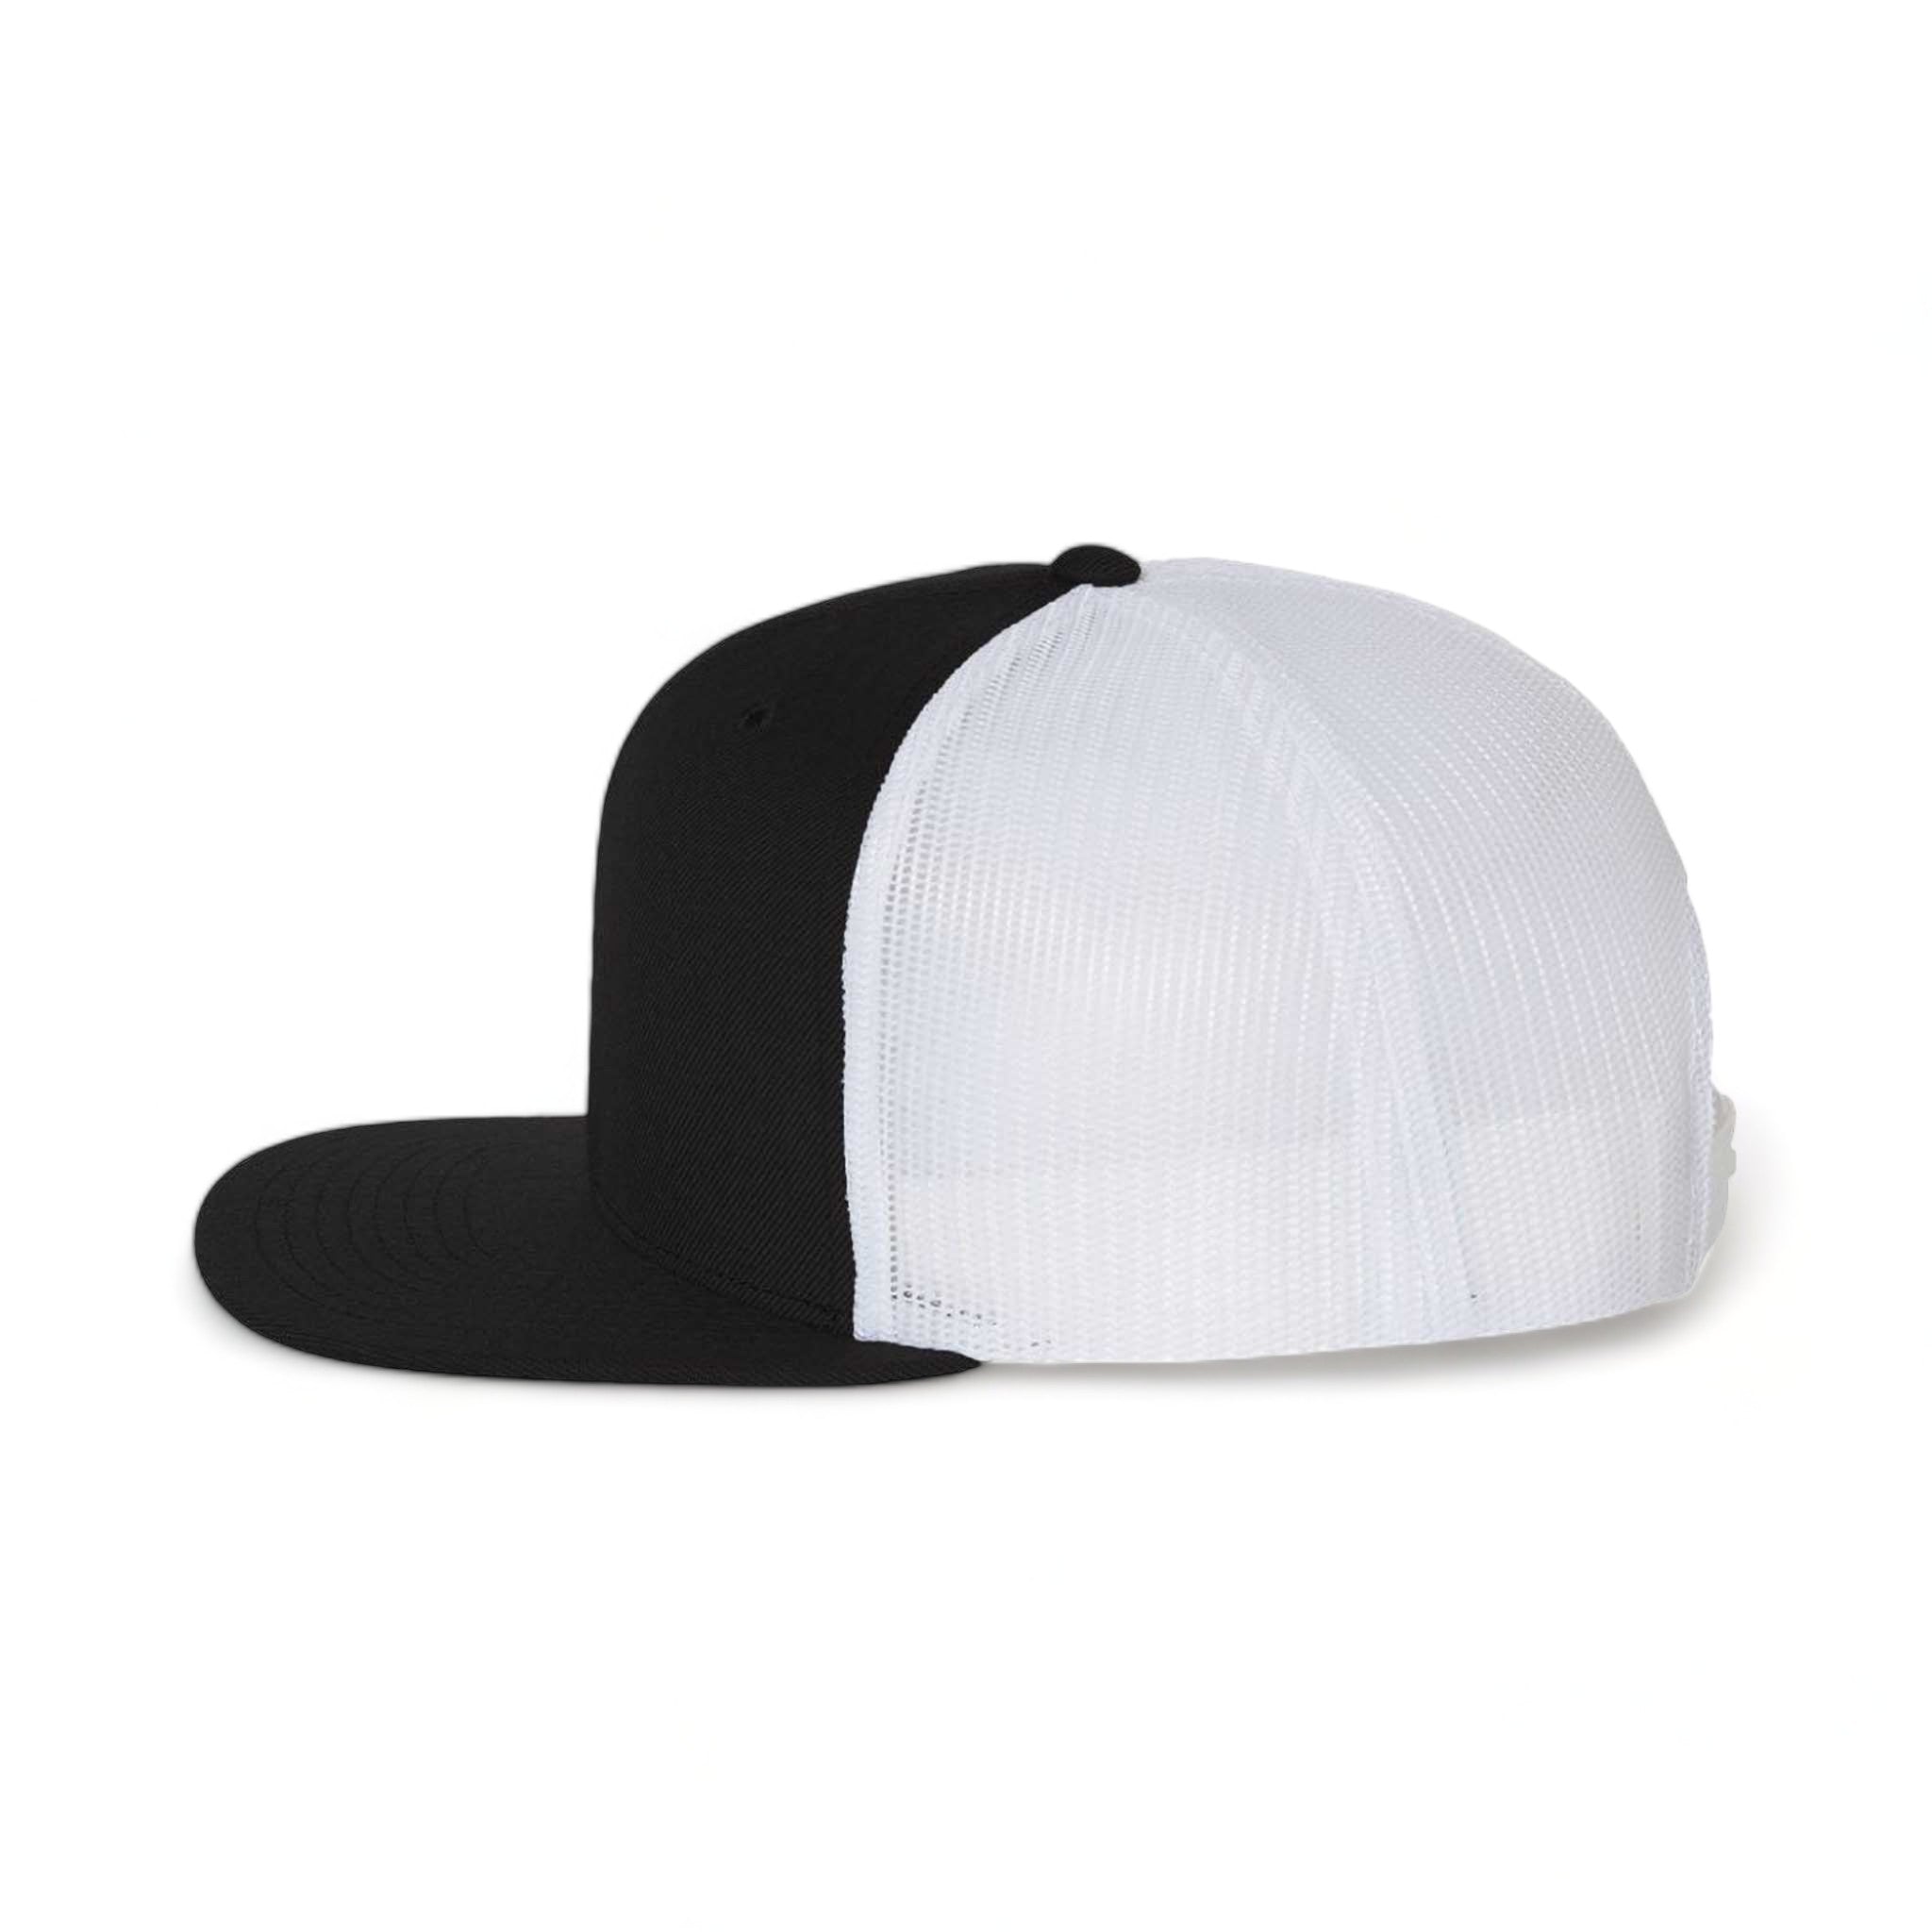 Side view of Richardson 511 custom hat in black and white